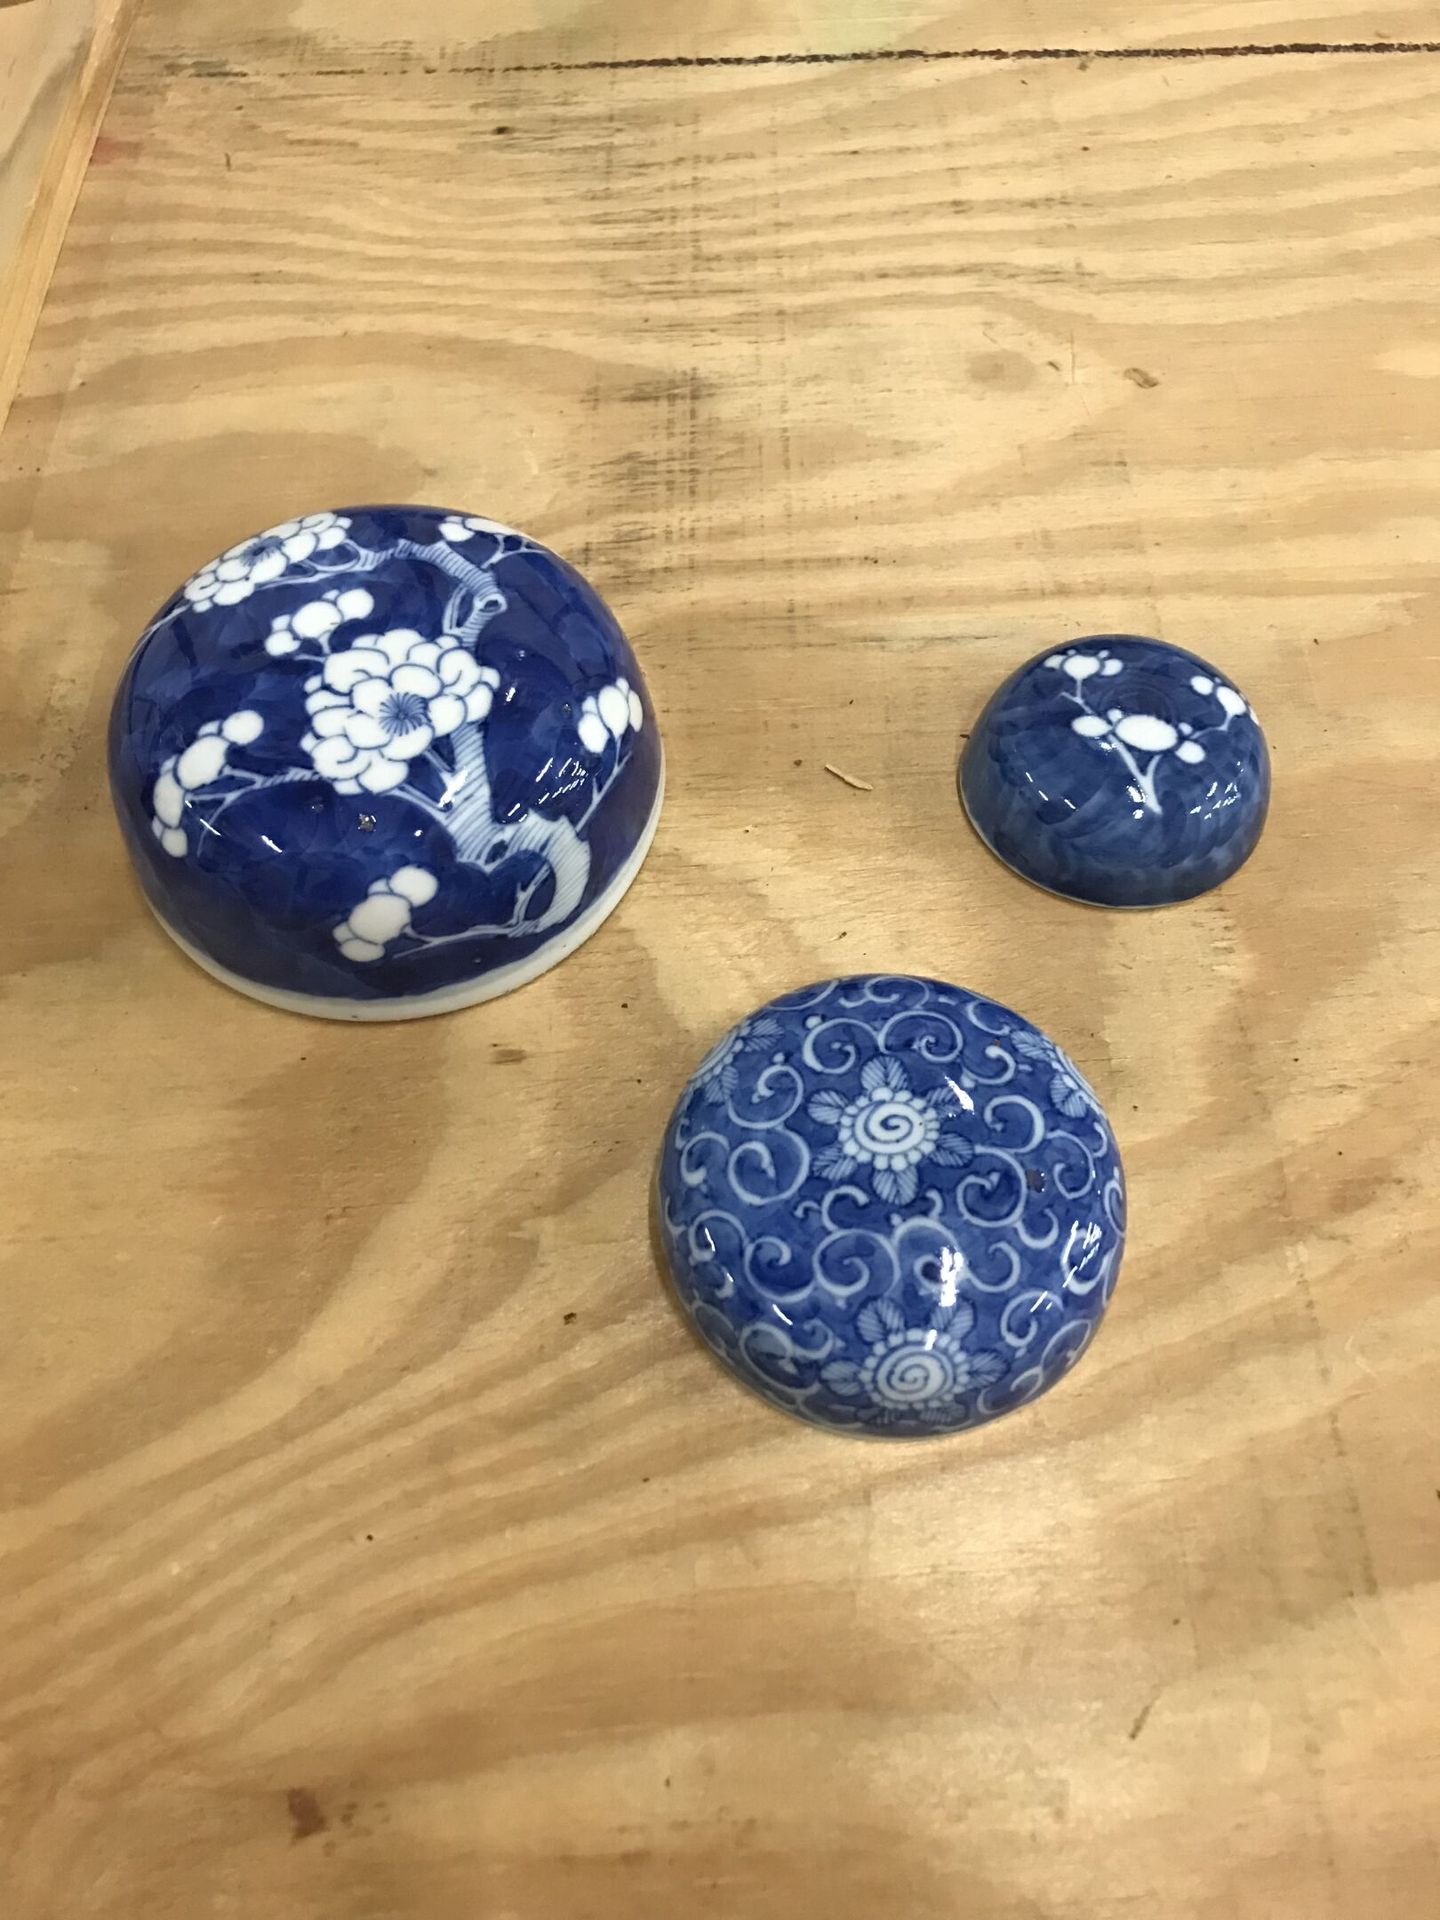 Null A batch of Chinese porcelain including:

Three mismatched blue and white po&hellip;